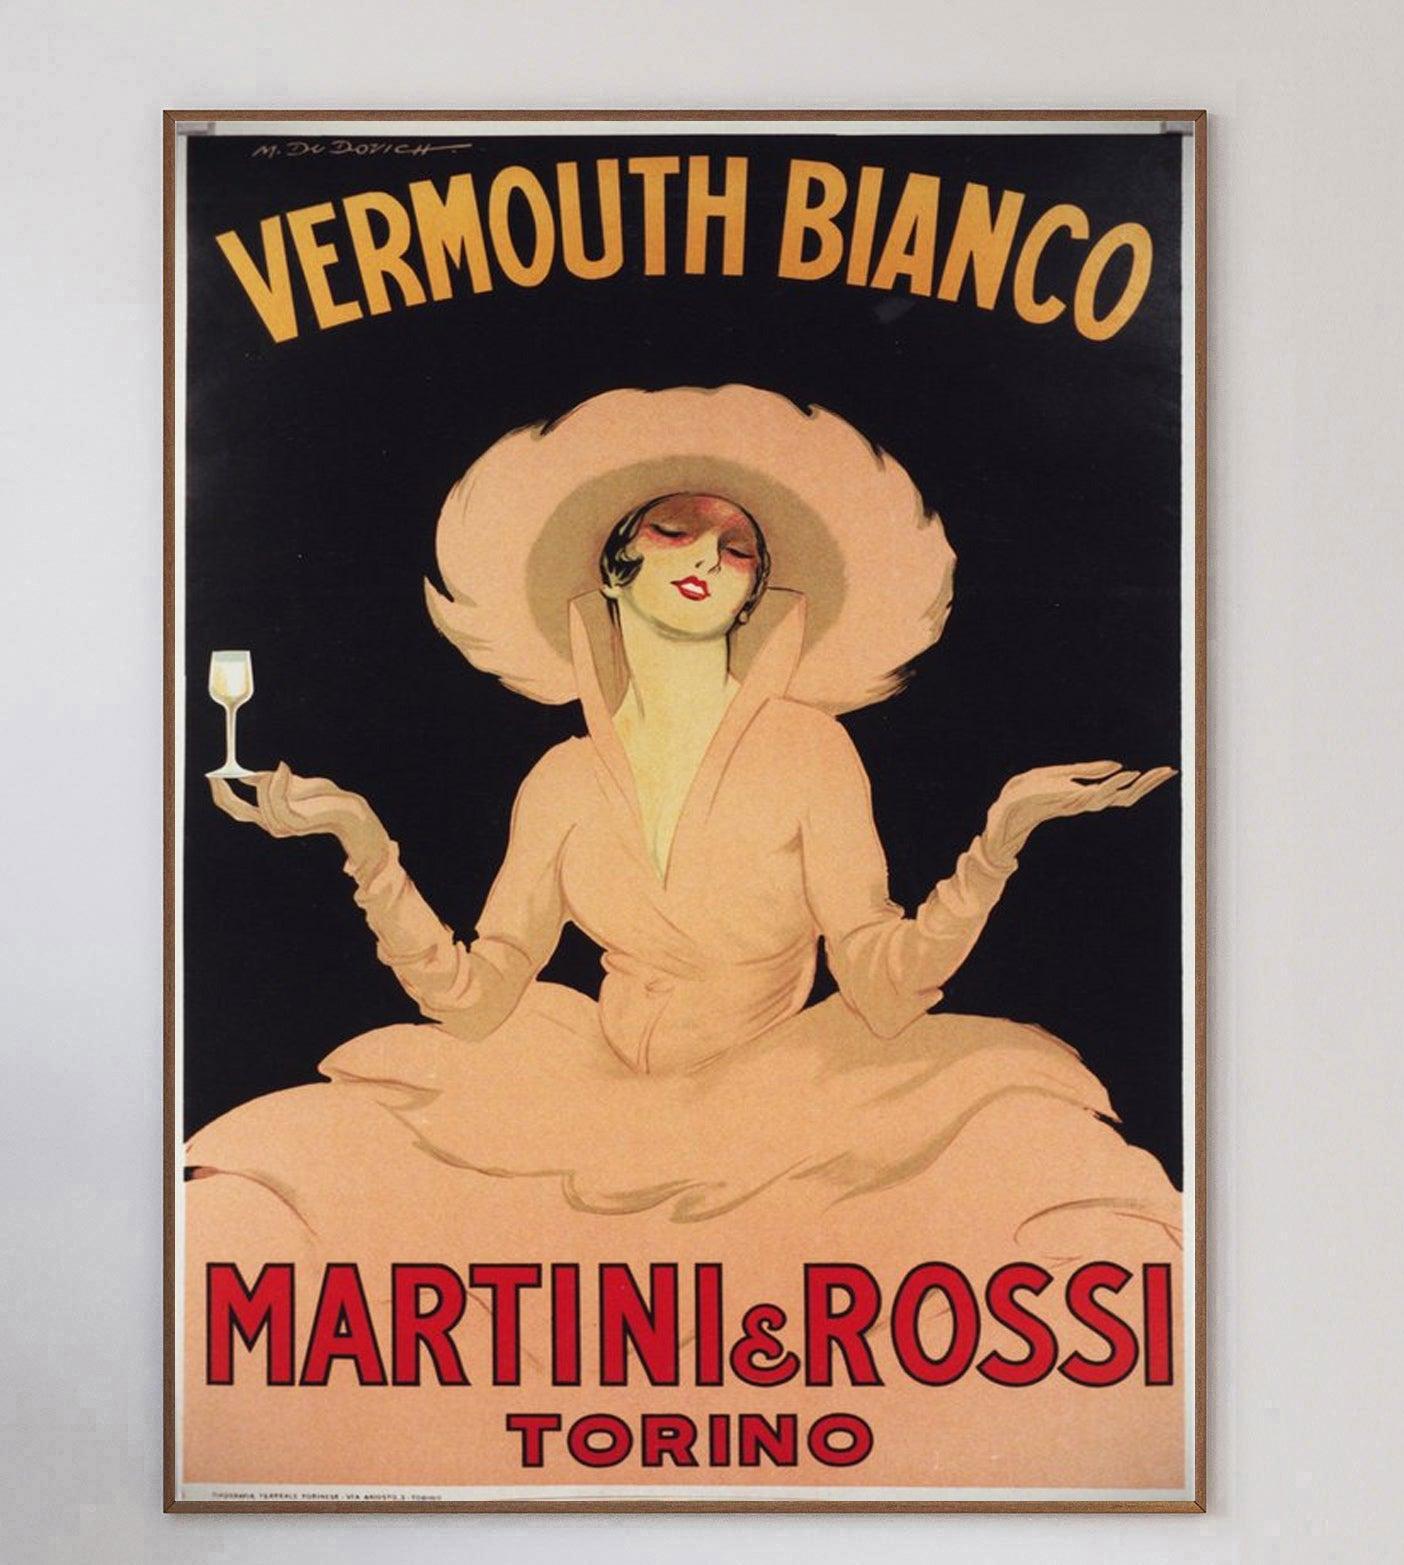 Beginning in the mid-19th Century in Italy, Martini & Rosso has become a multi-national beverage brand. This beautiful poster was originally created in the 1930’s, and was so successful that it was still running in the 1960’s, and is widely seen